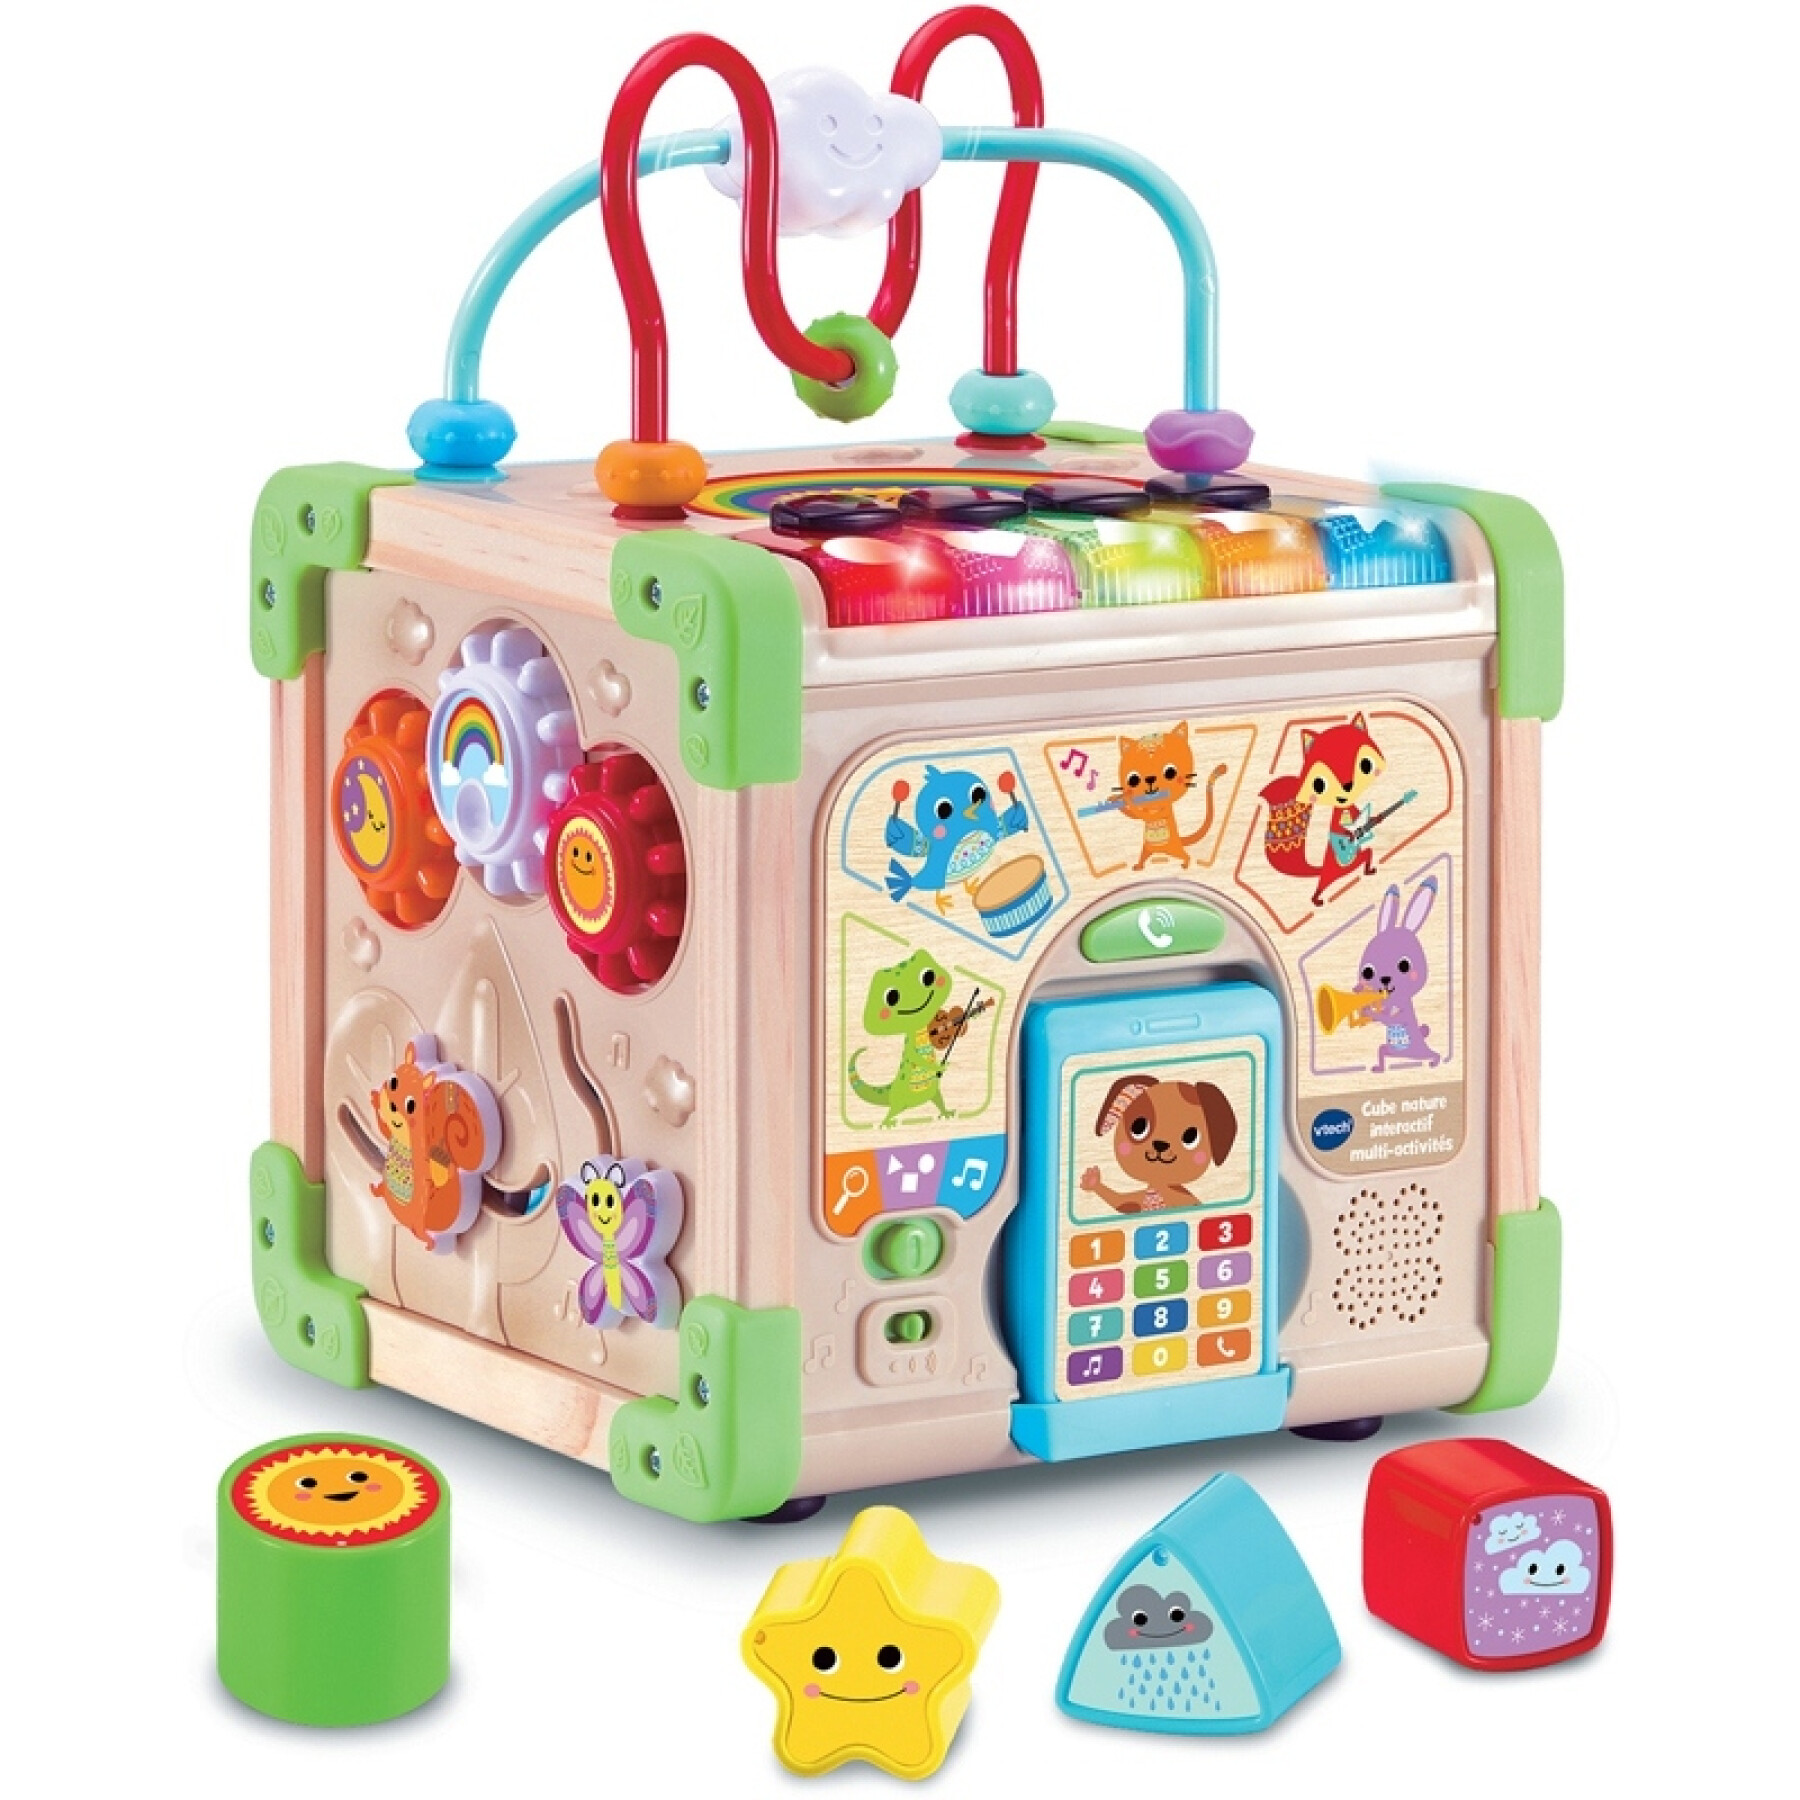 Cube indoor play set Vtech Electronics Europe